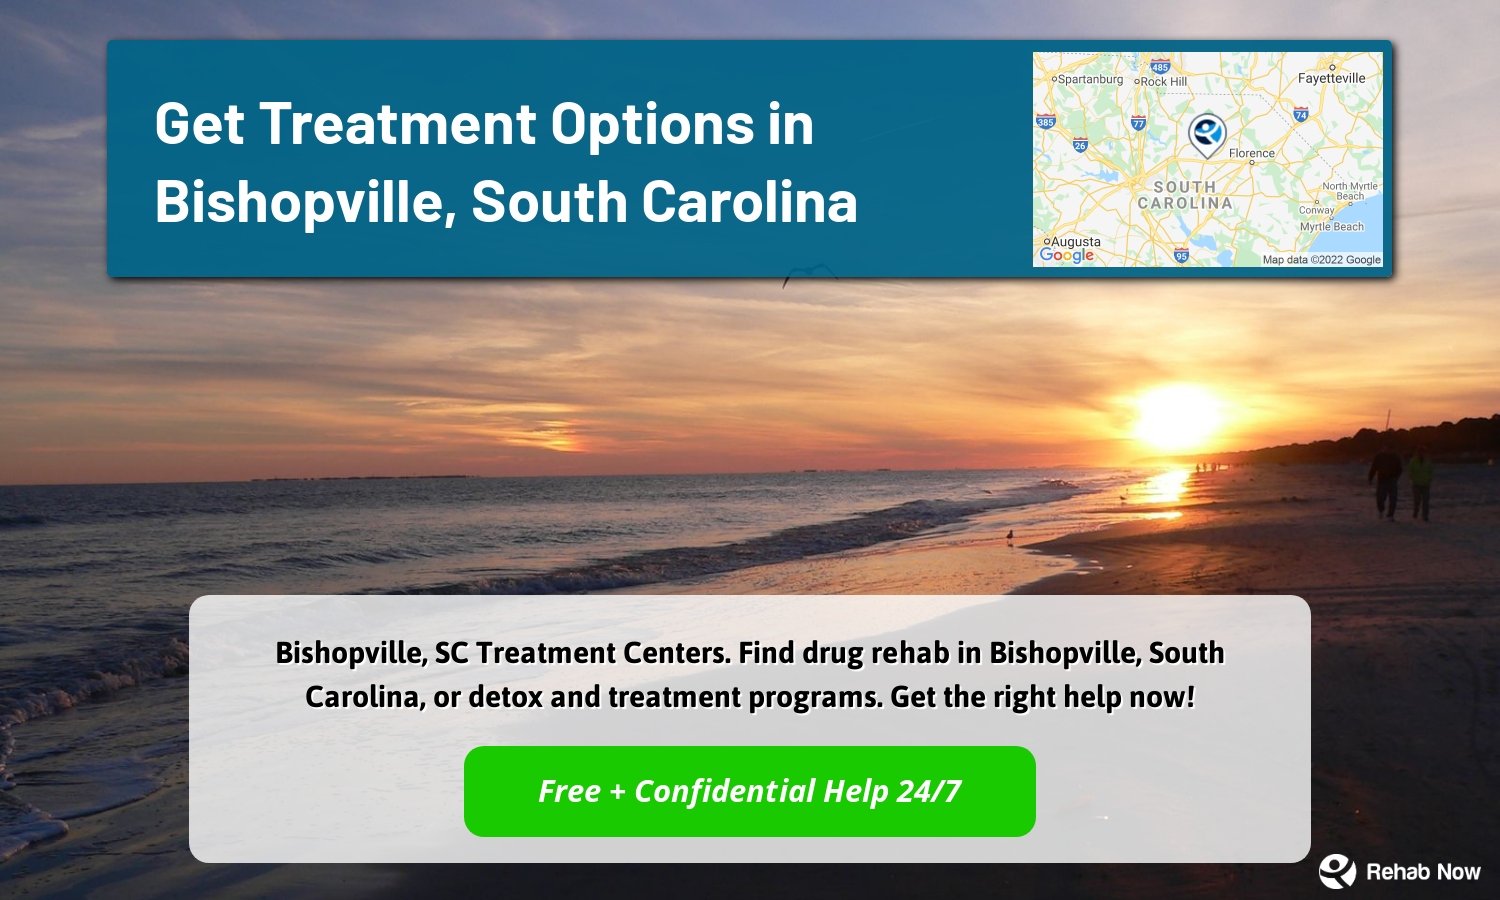 Bishopville, SC Treatment Centers. Find drug rehab in Bishopville, South Carolina, or detox and treatment programs. Get the right help now!